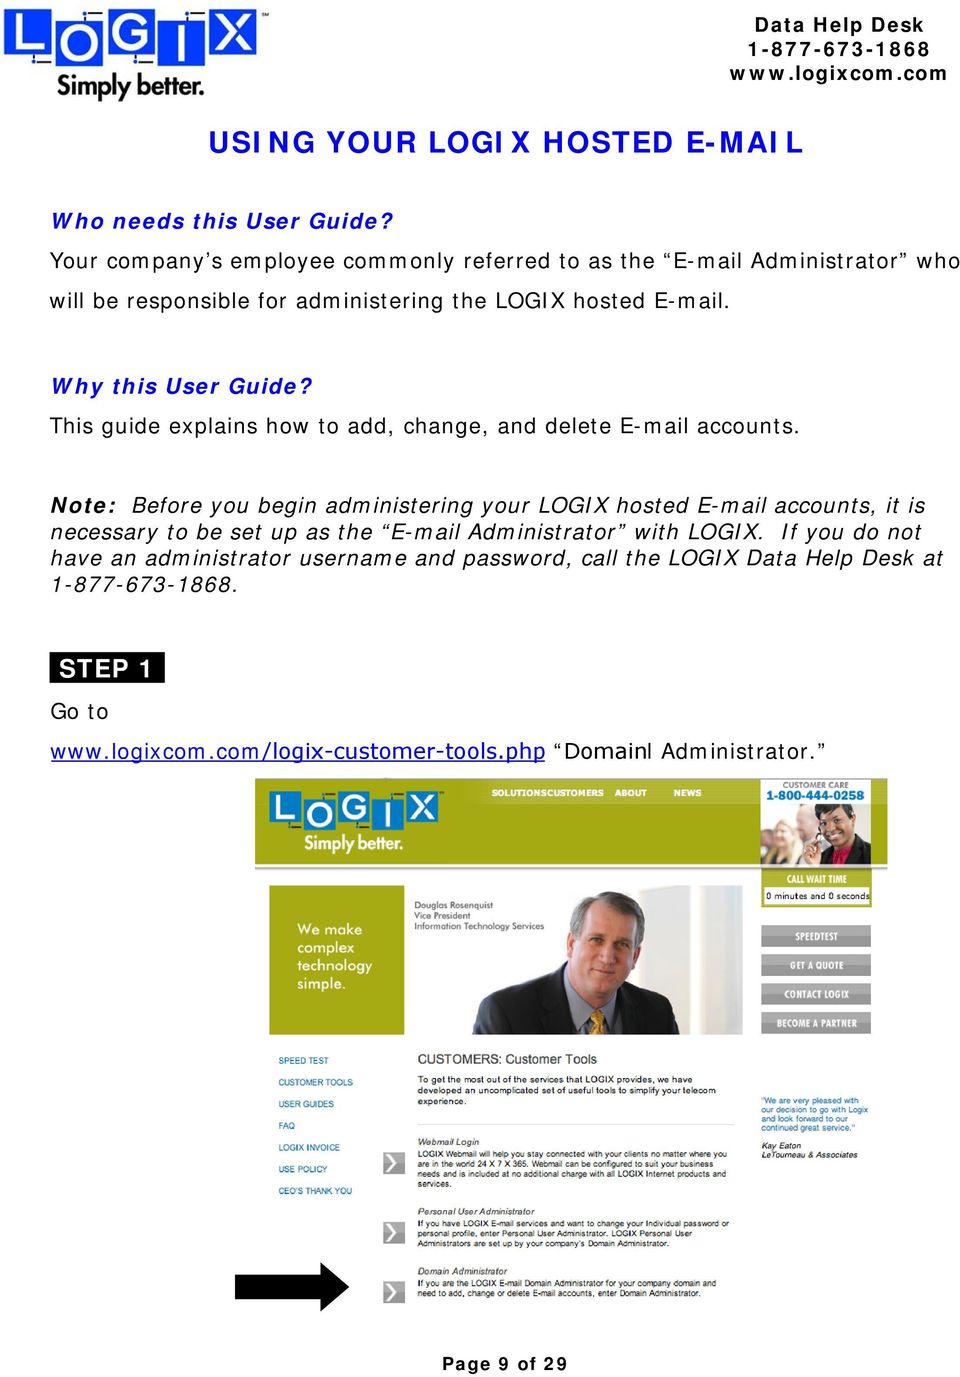 Why this User Guide? This guide explains how to add, change, and delete E-mail accounts.